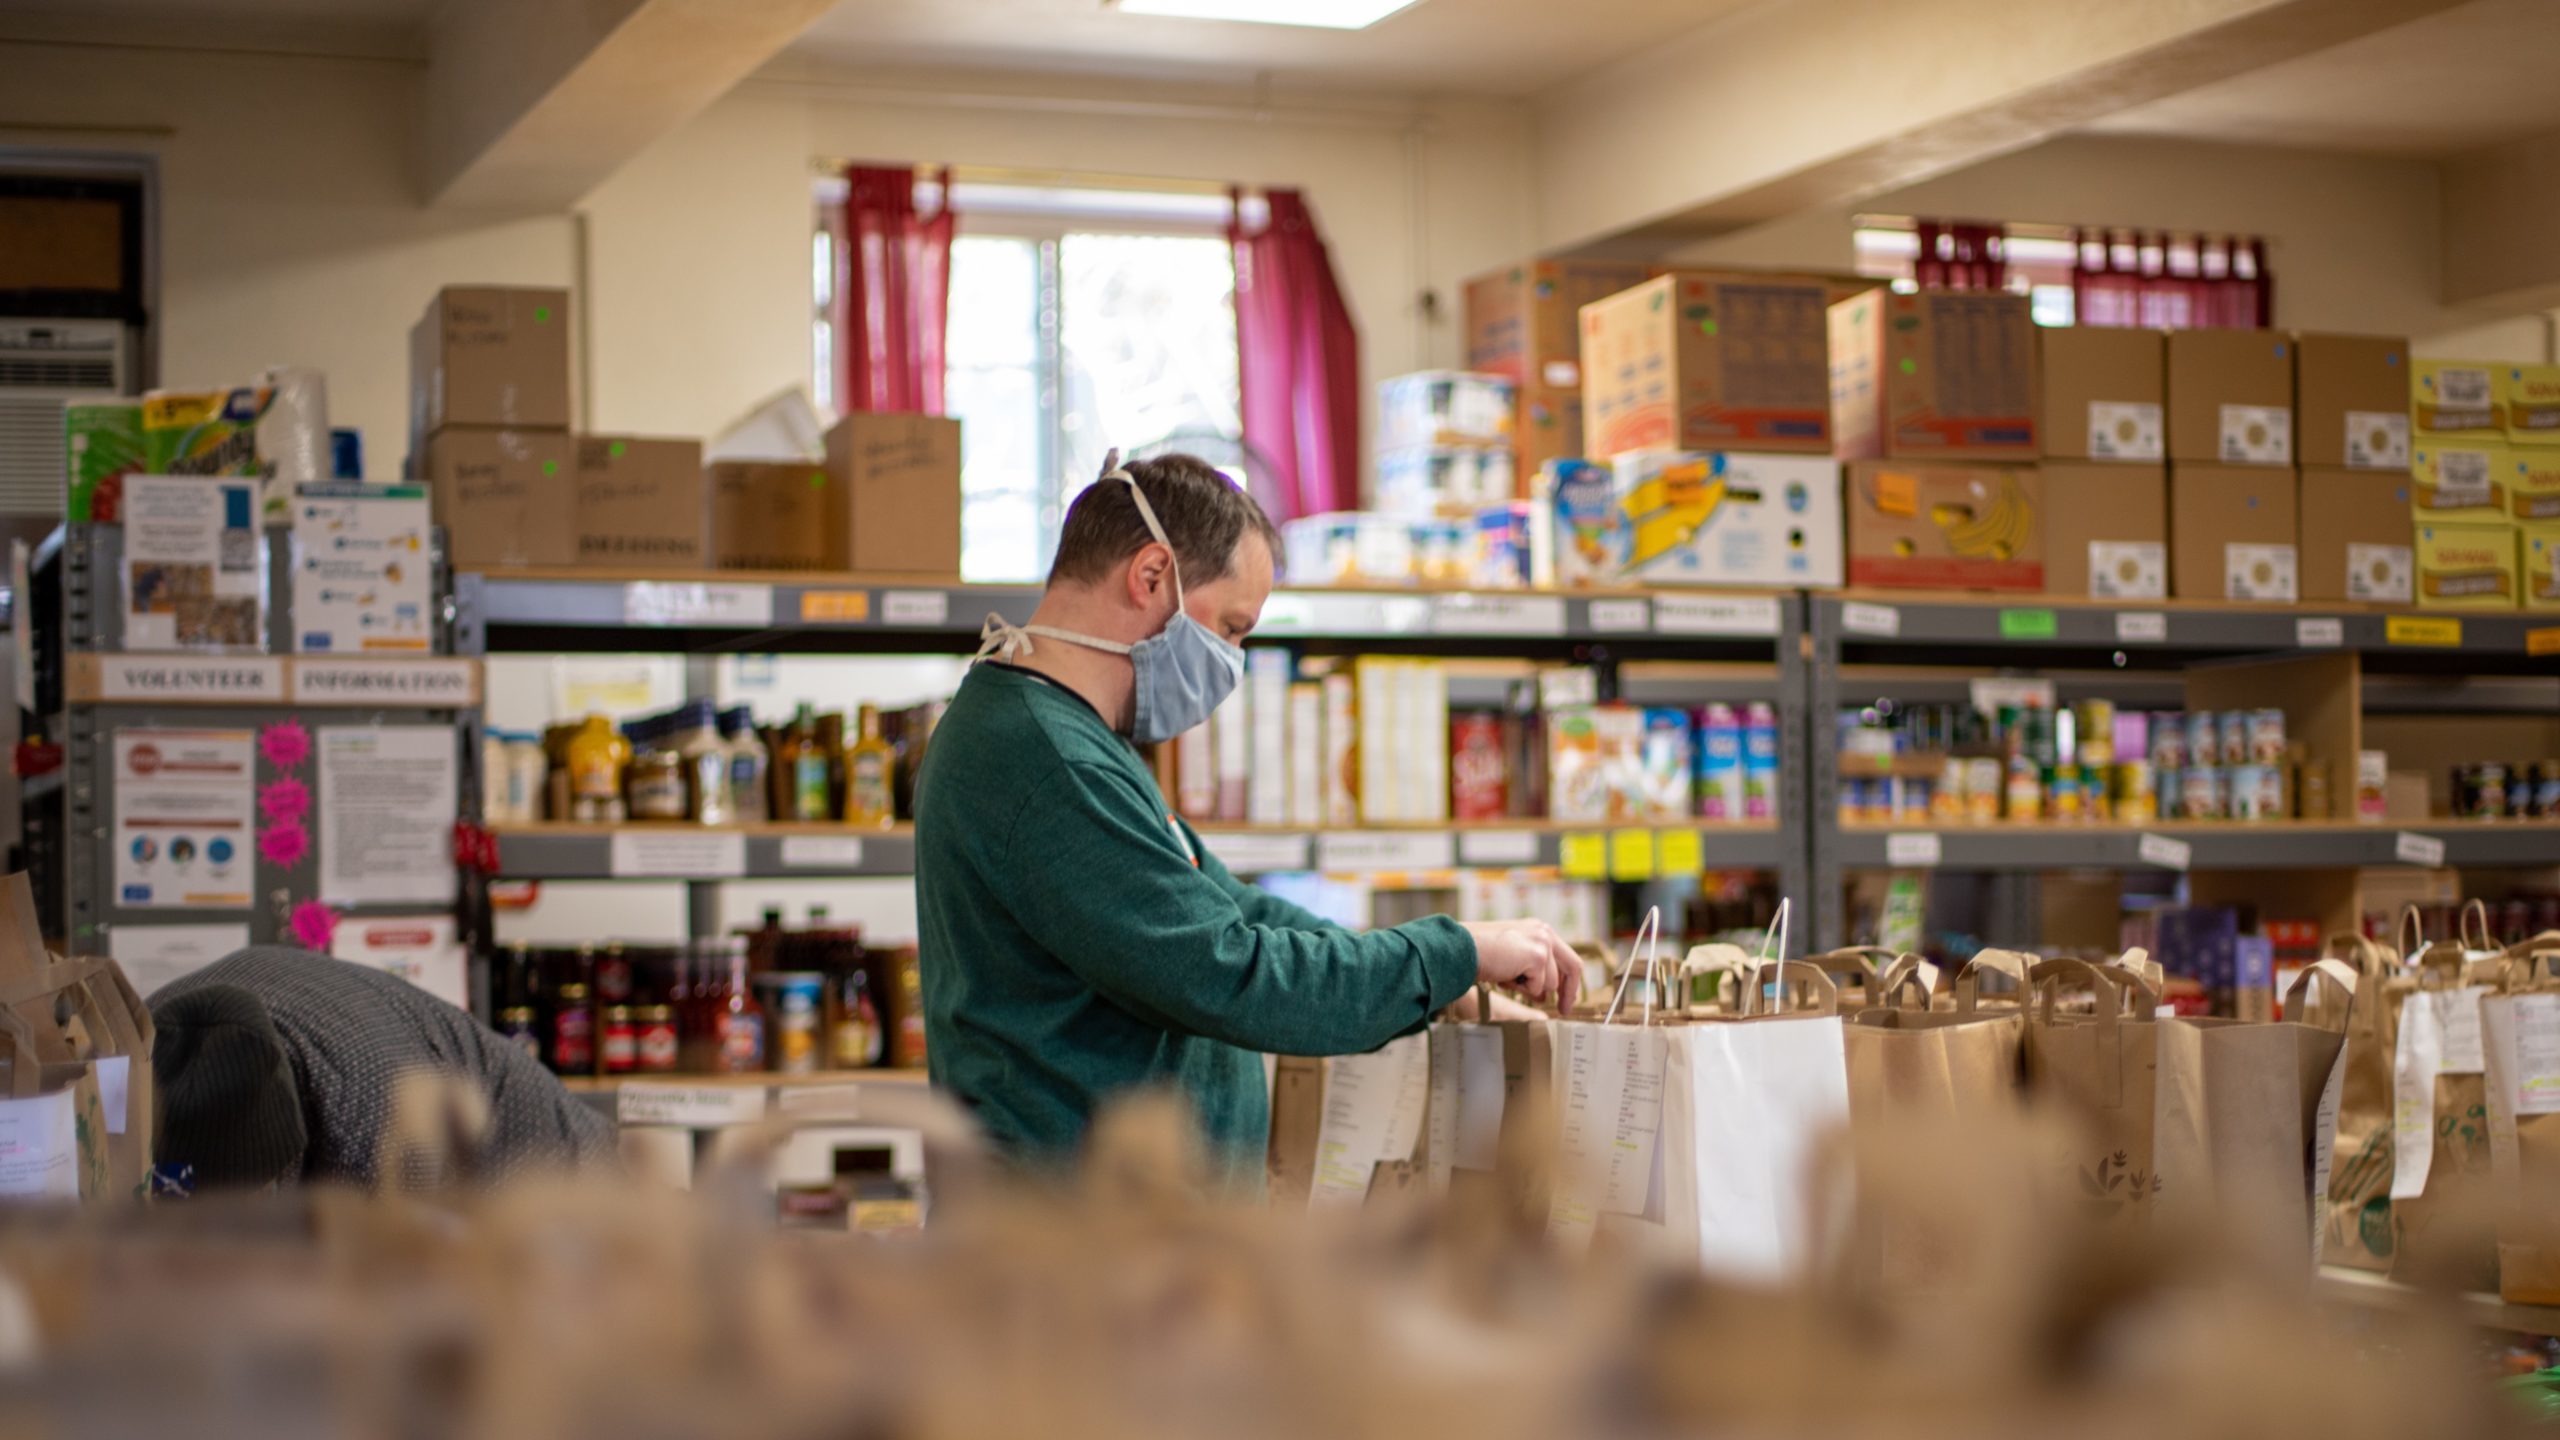 Food parcels are prepared by a volunteer at a food bank